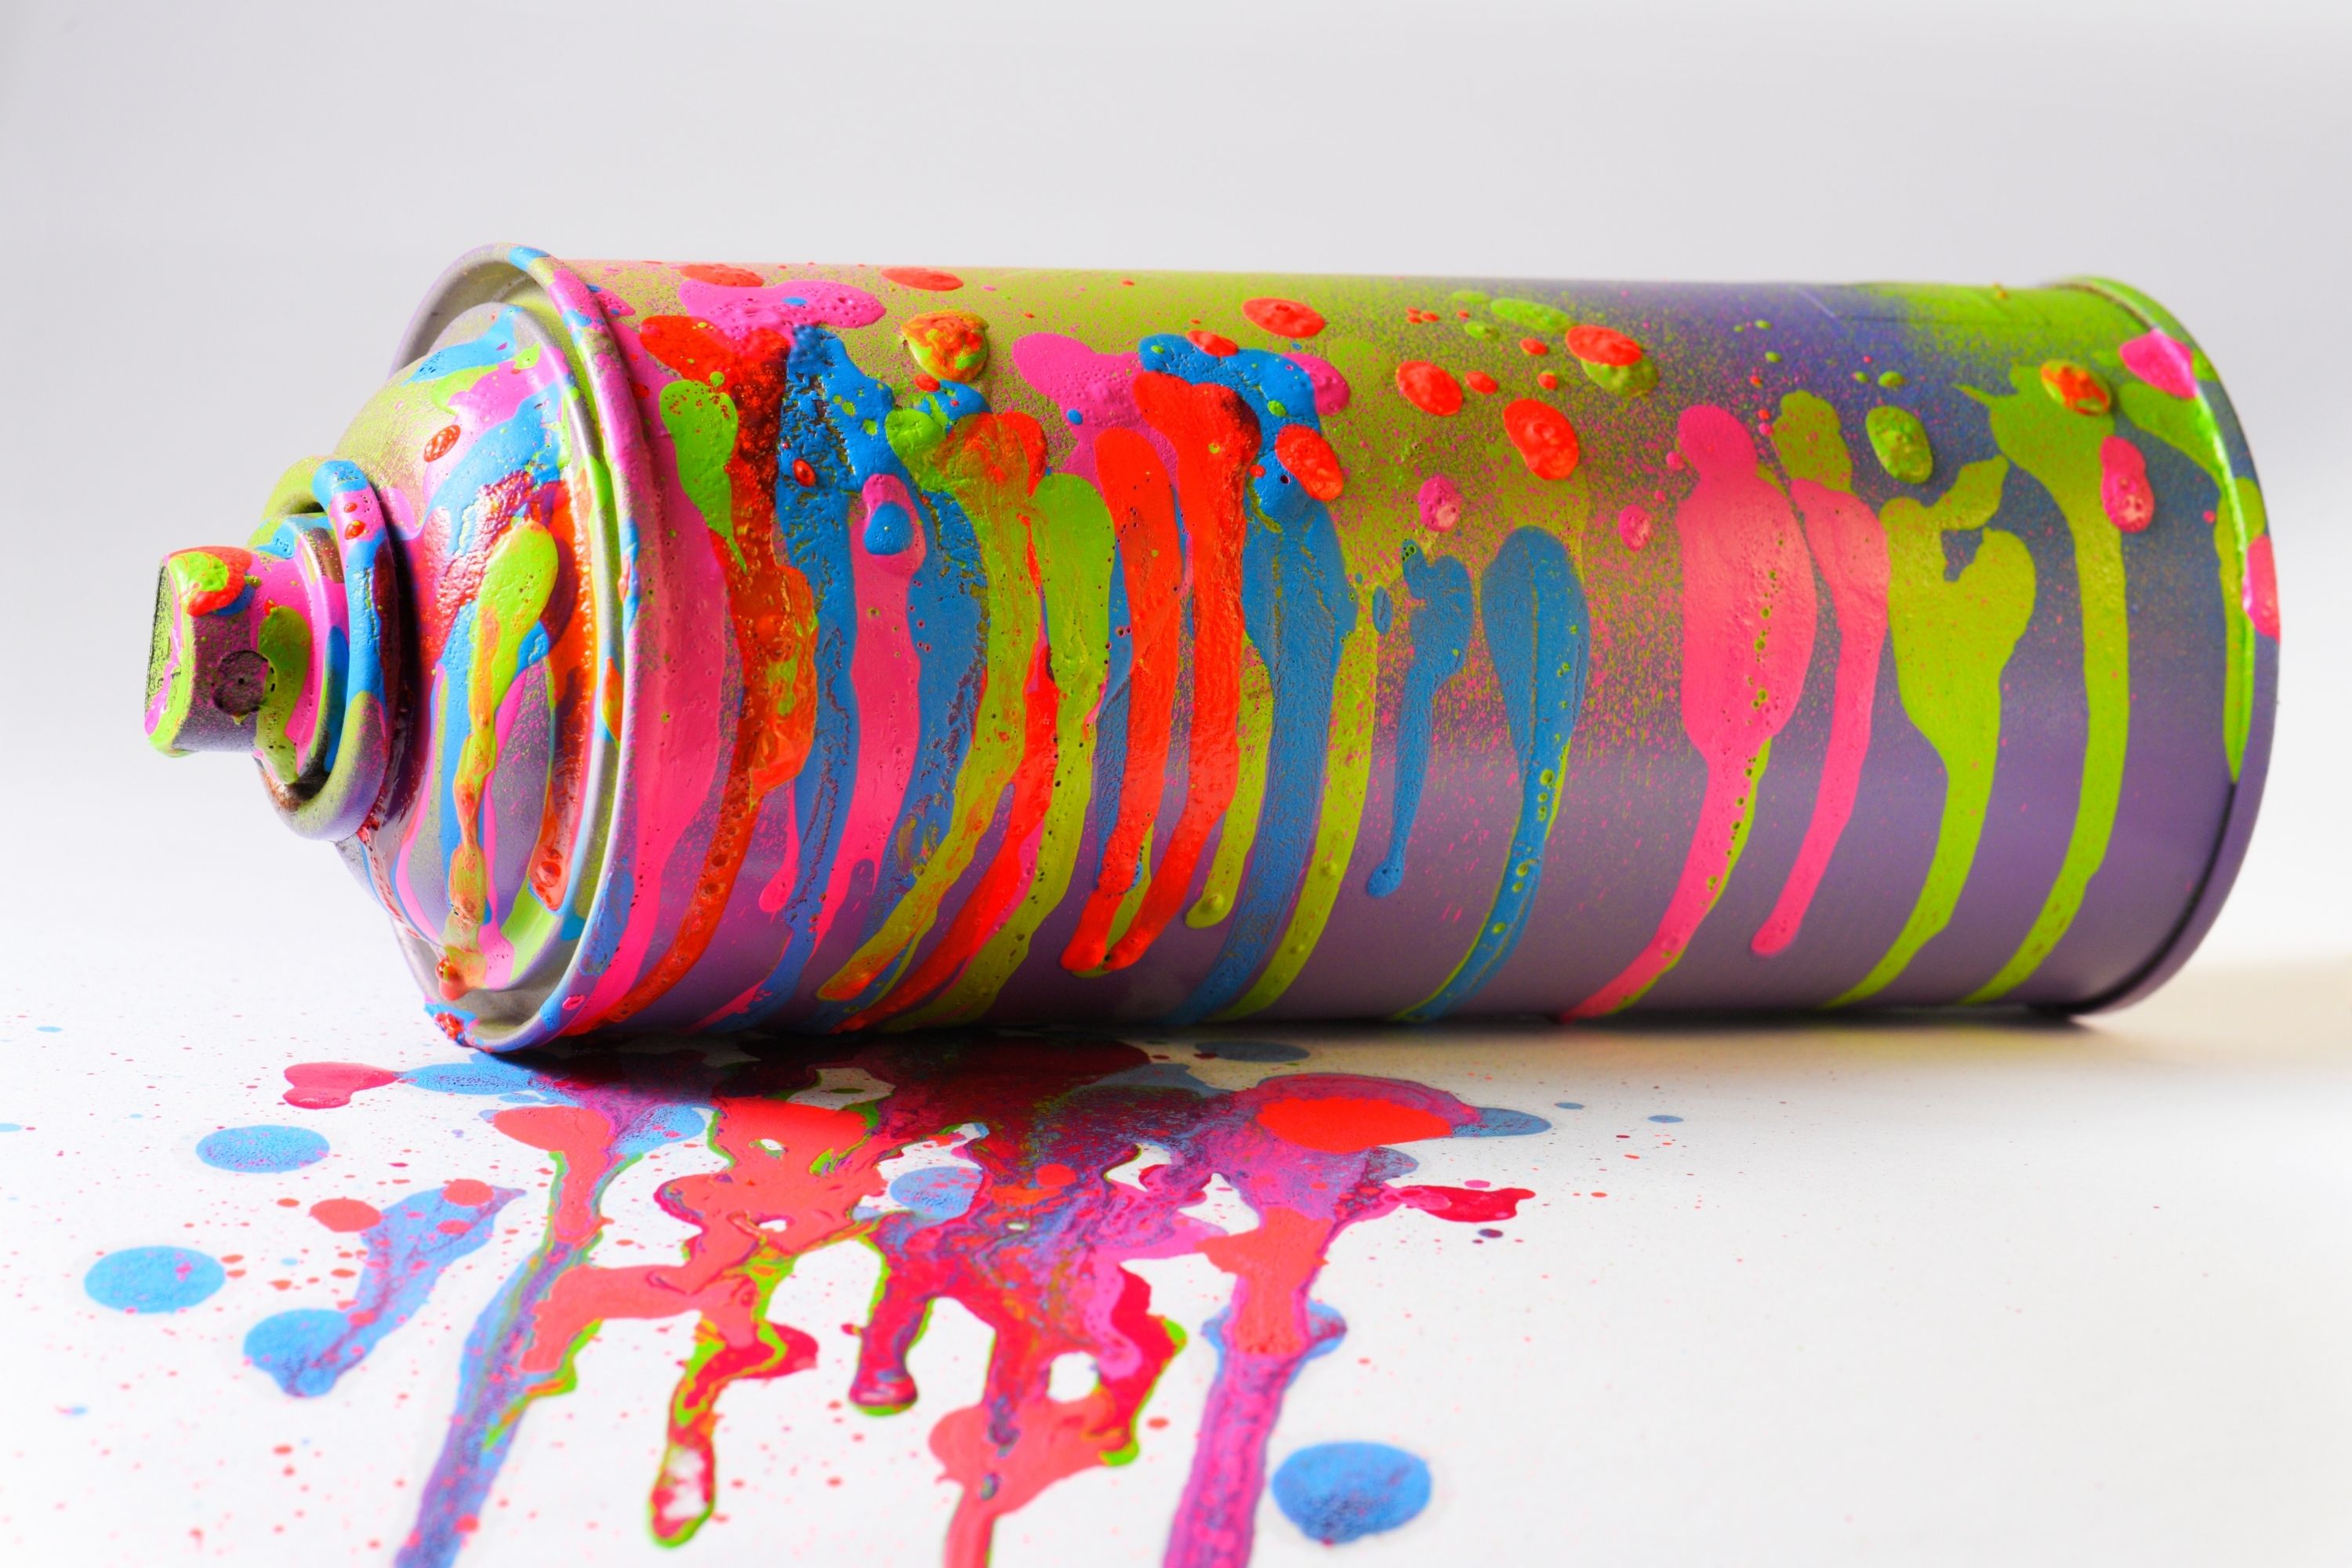 How to Make Spray Paint Not Sticky